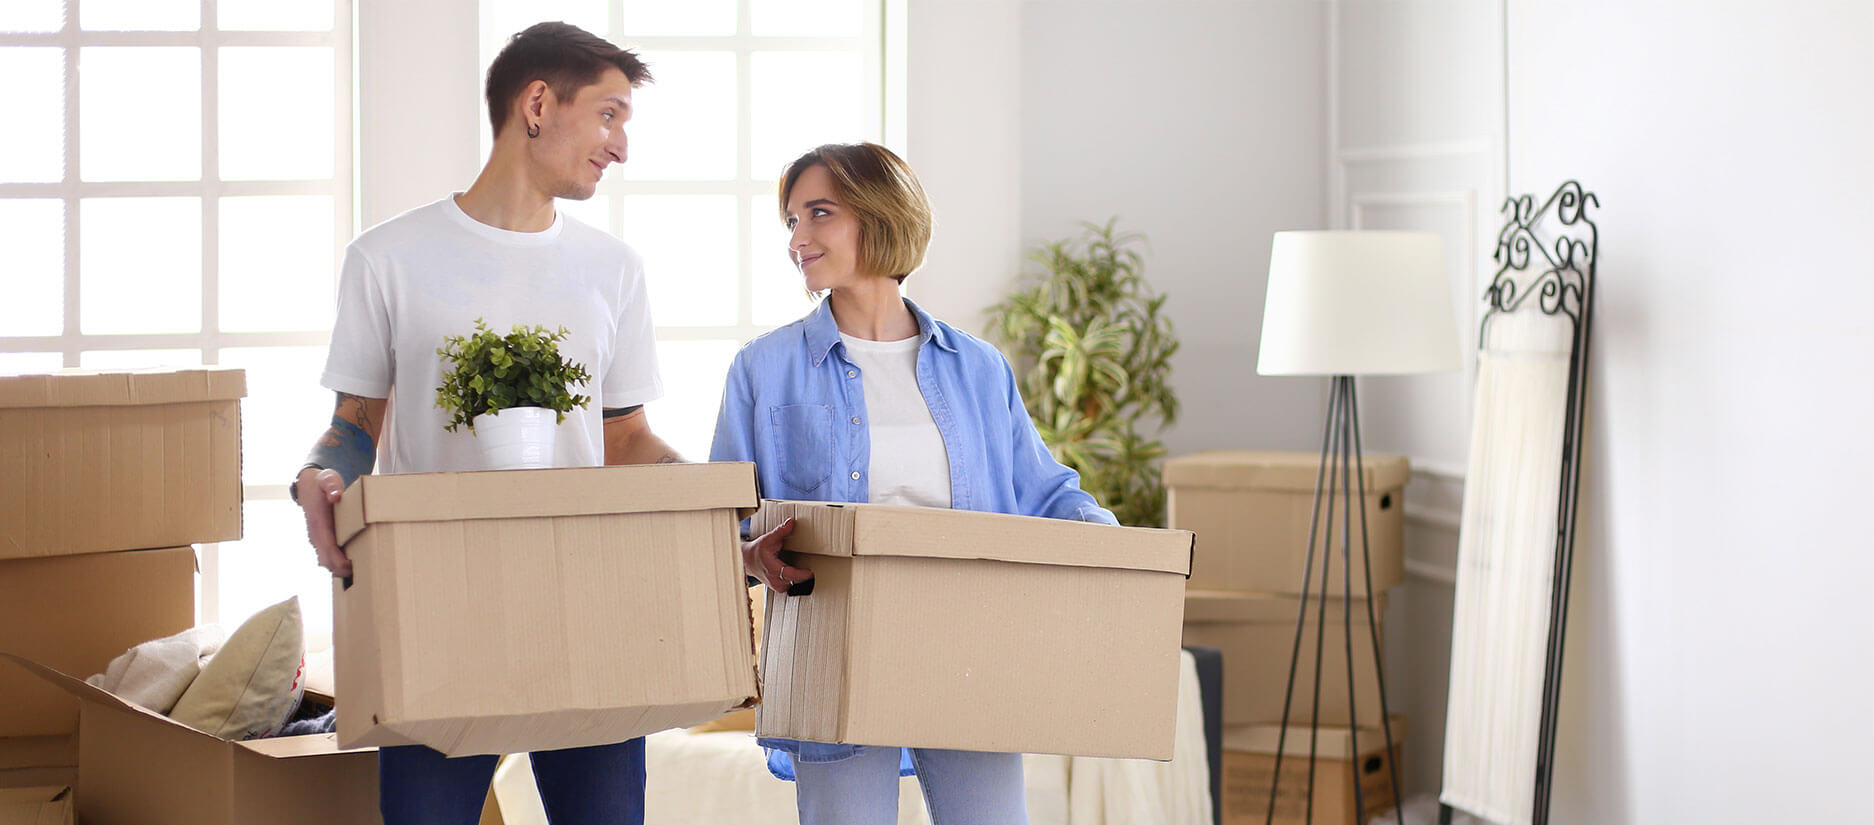 How to Handle Fragile or Valuable Items During Your Move